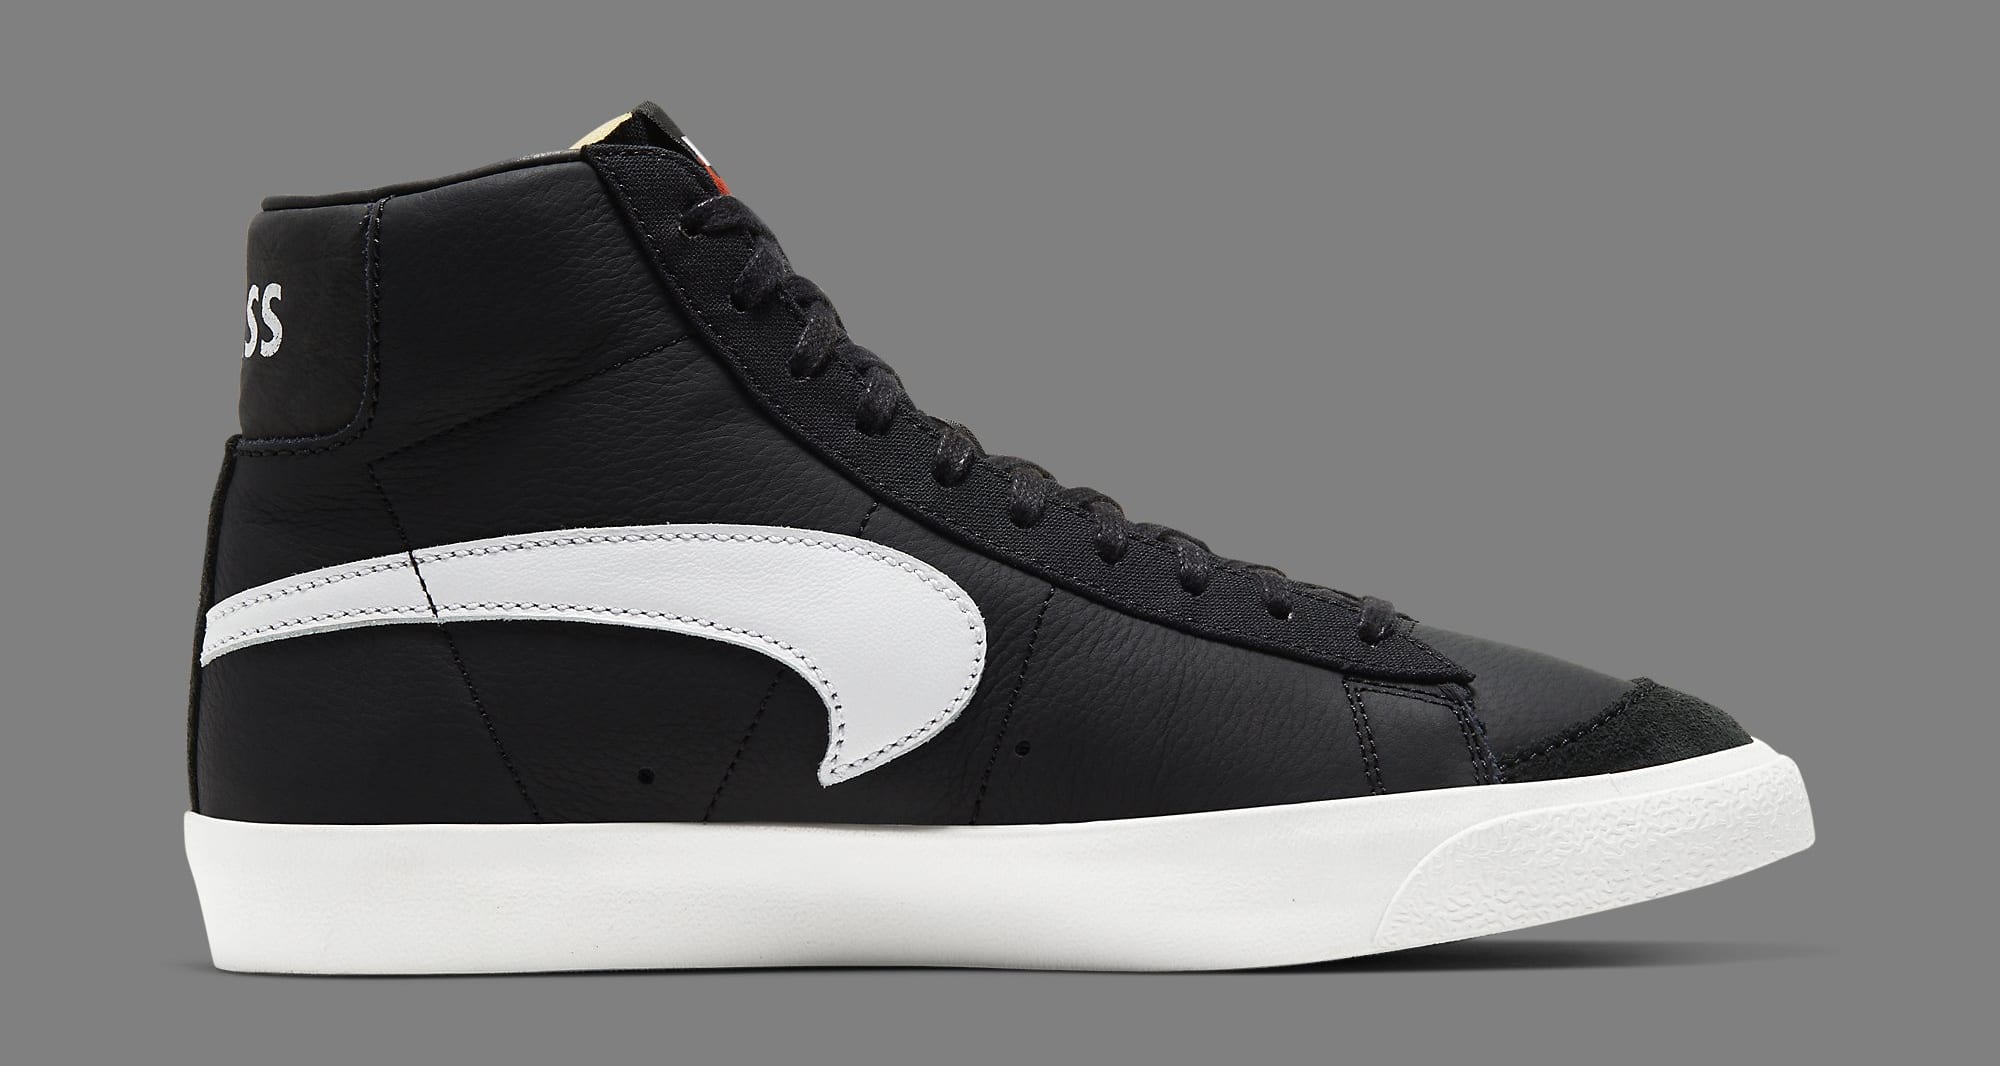 Slam Jam Has Another Nike Blazer Collab Dropping Soon | Complex